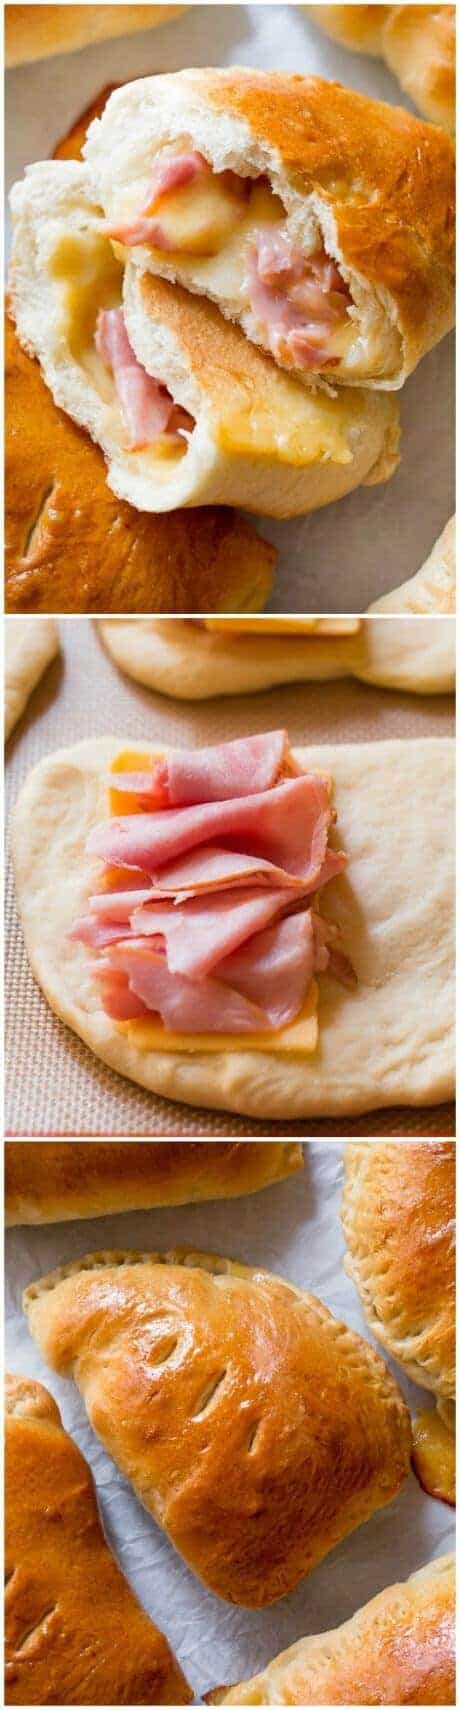 Homemade Freezer Ham and Cheese Pockets Recipe from Sally's Baking Addiction #freezermeals #makeaheadmeals "Just microwave the frozen pockets for about 2-3 minutes and you’ve got hot and melty pockets with real food packed inside."  